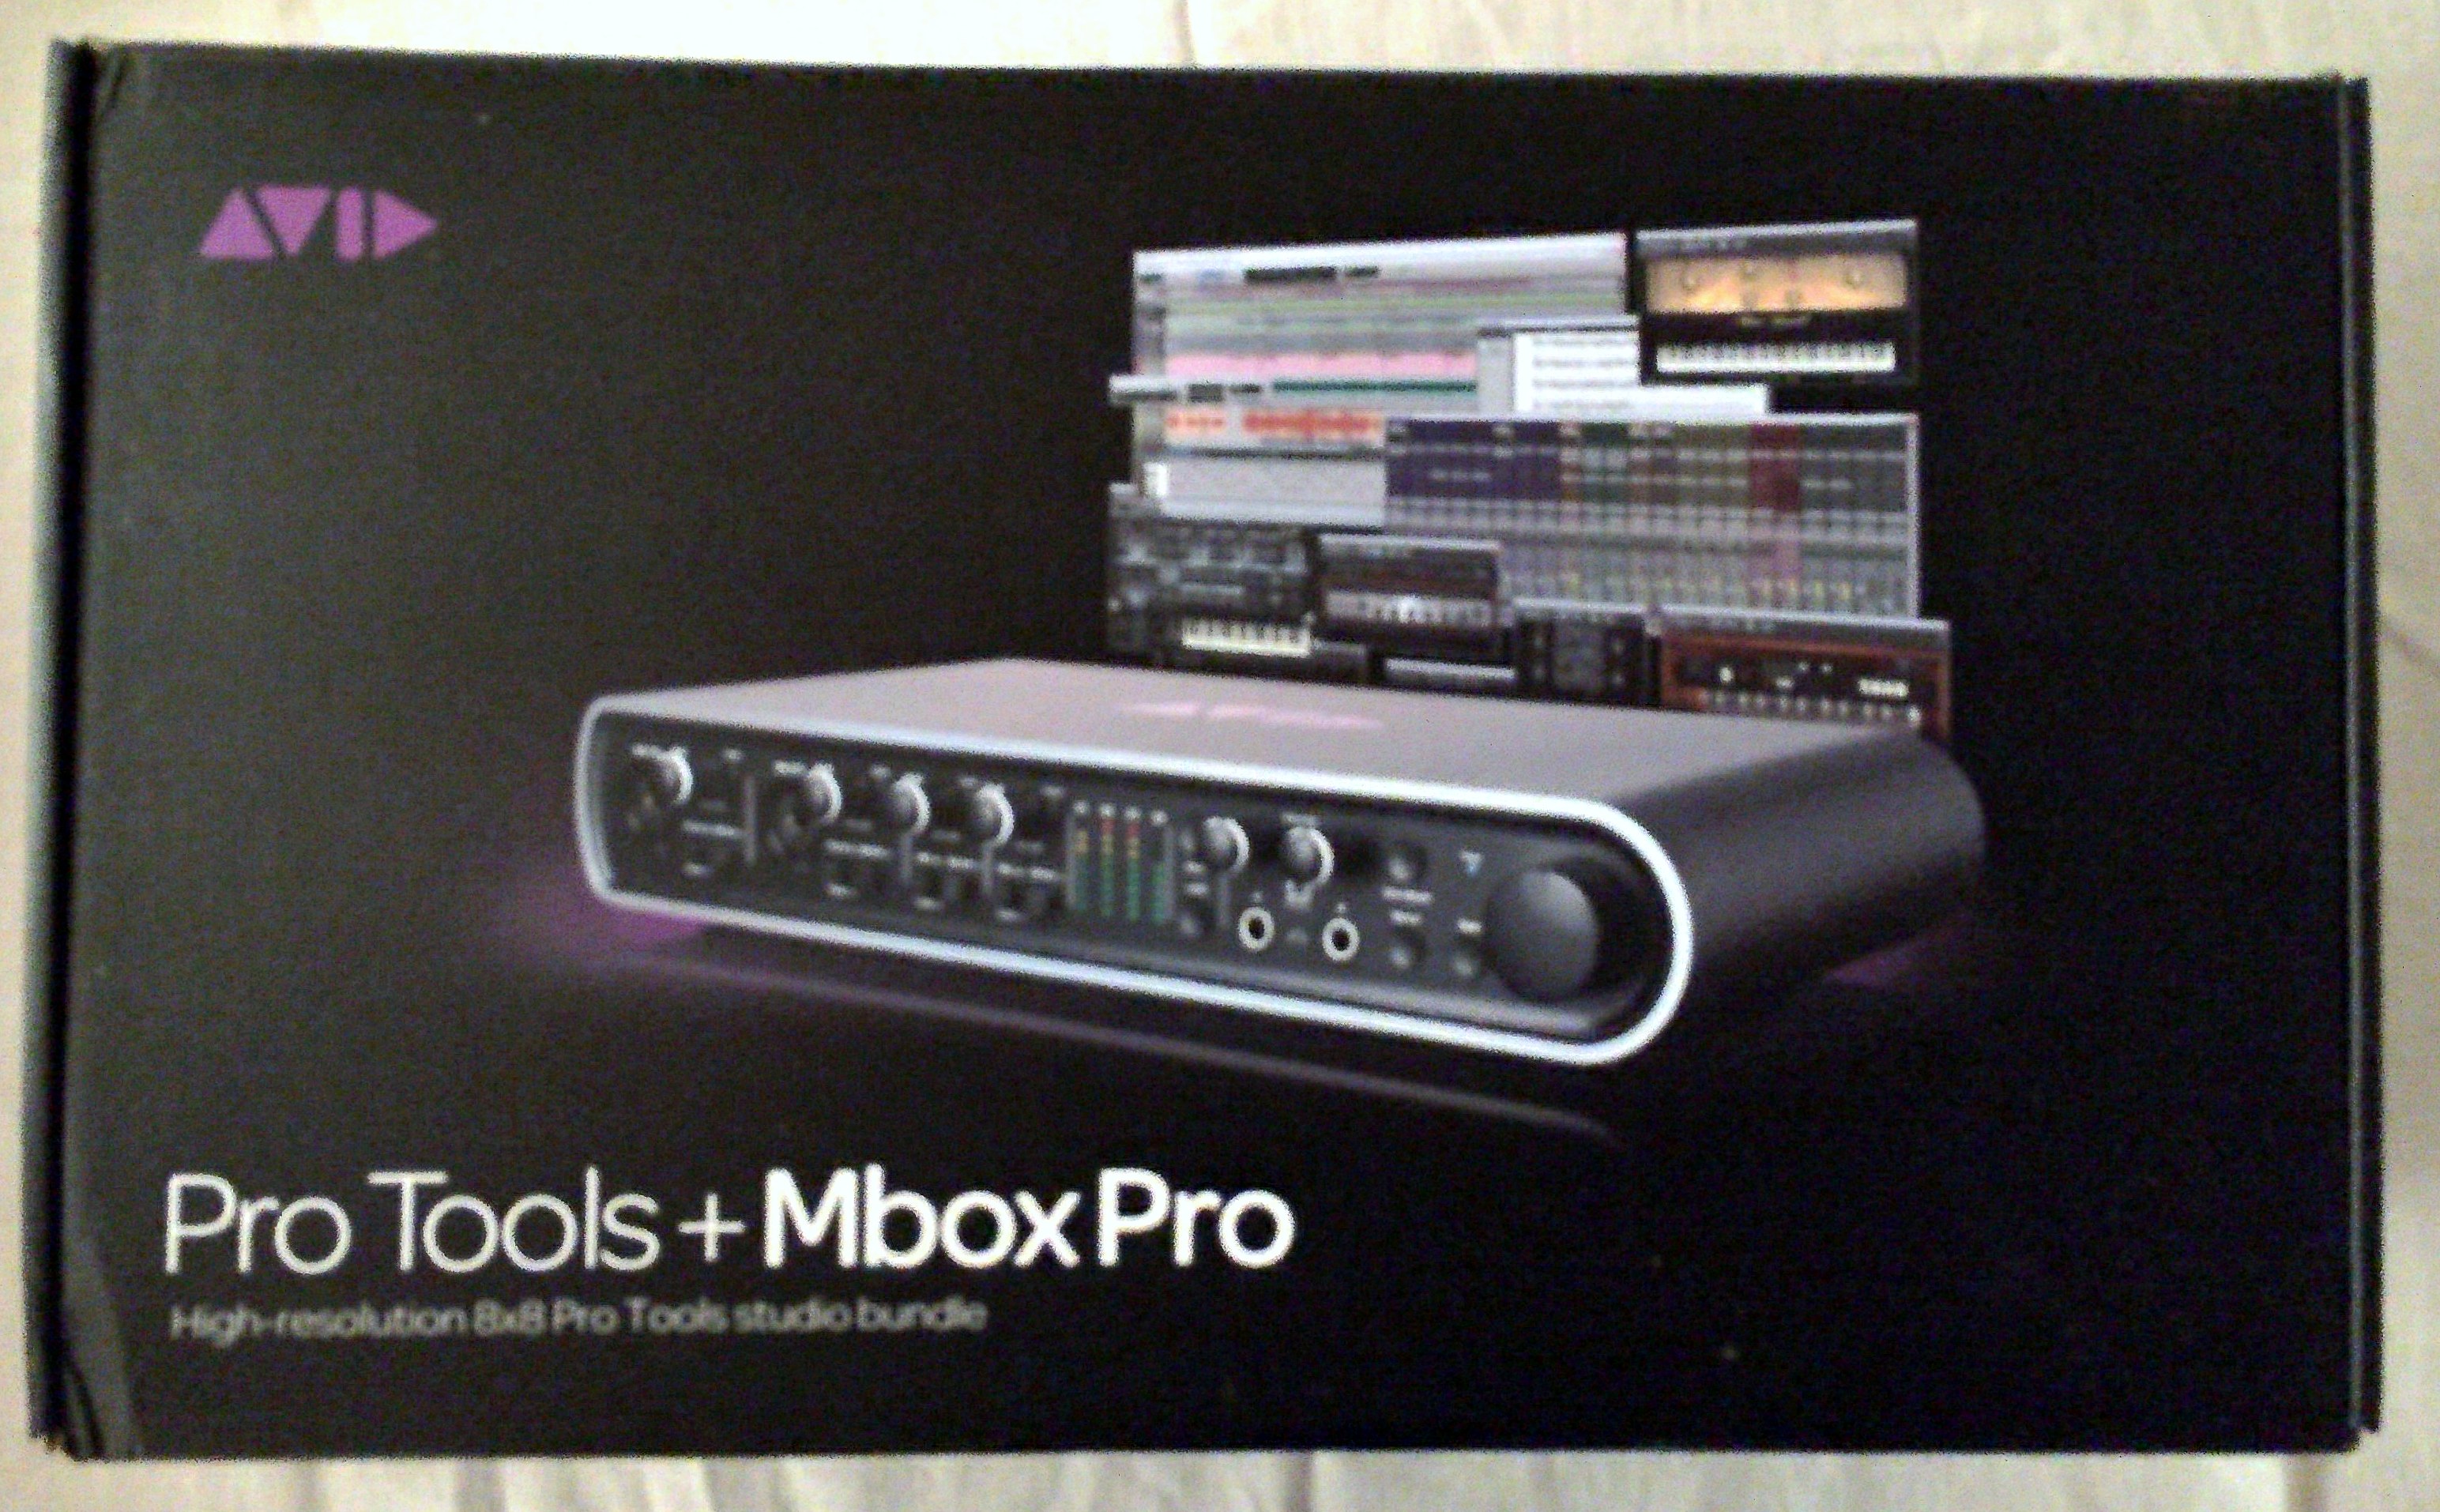 pro tools 11 free download full version for windows 7